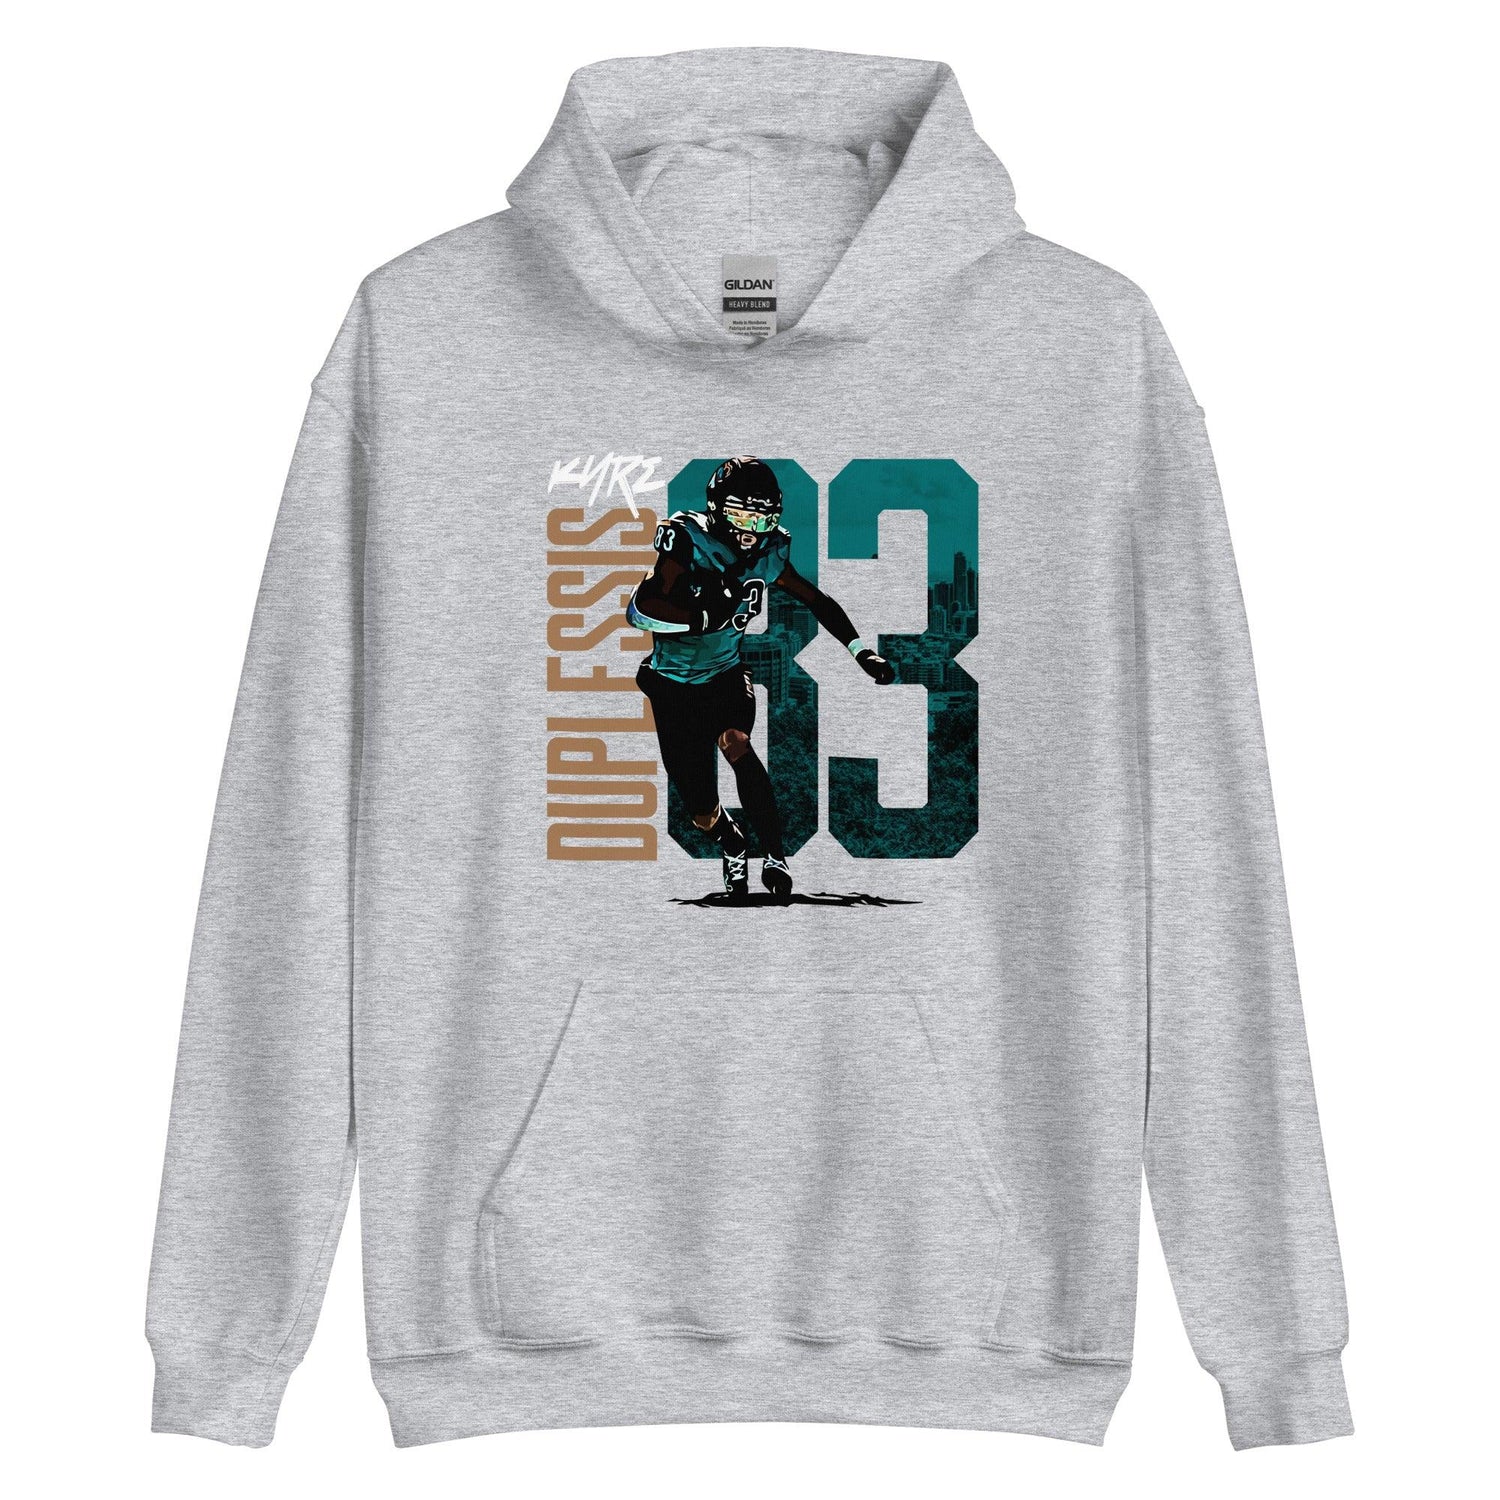 Kyre Duplessis "Gameday" Hoodie - Fan Arch